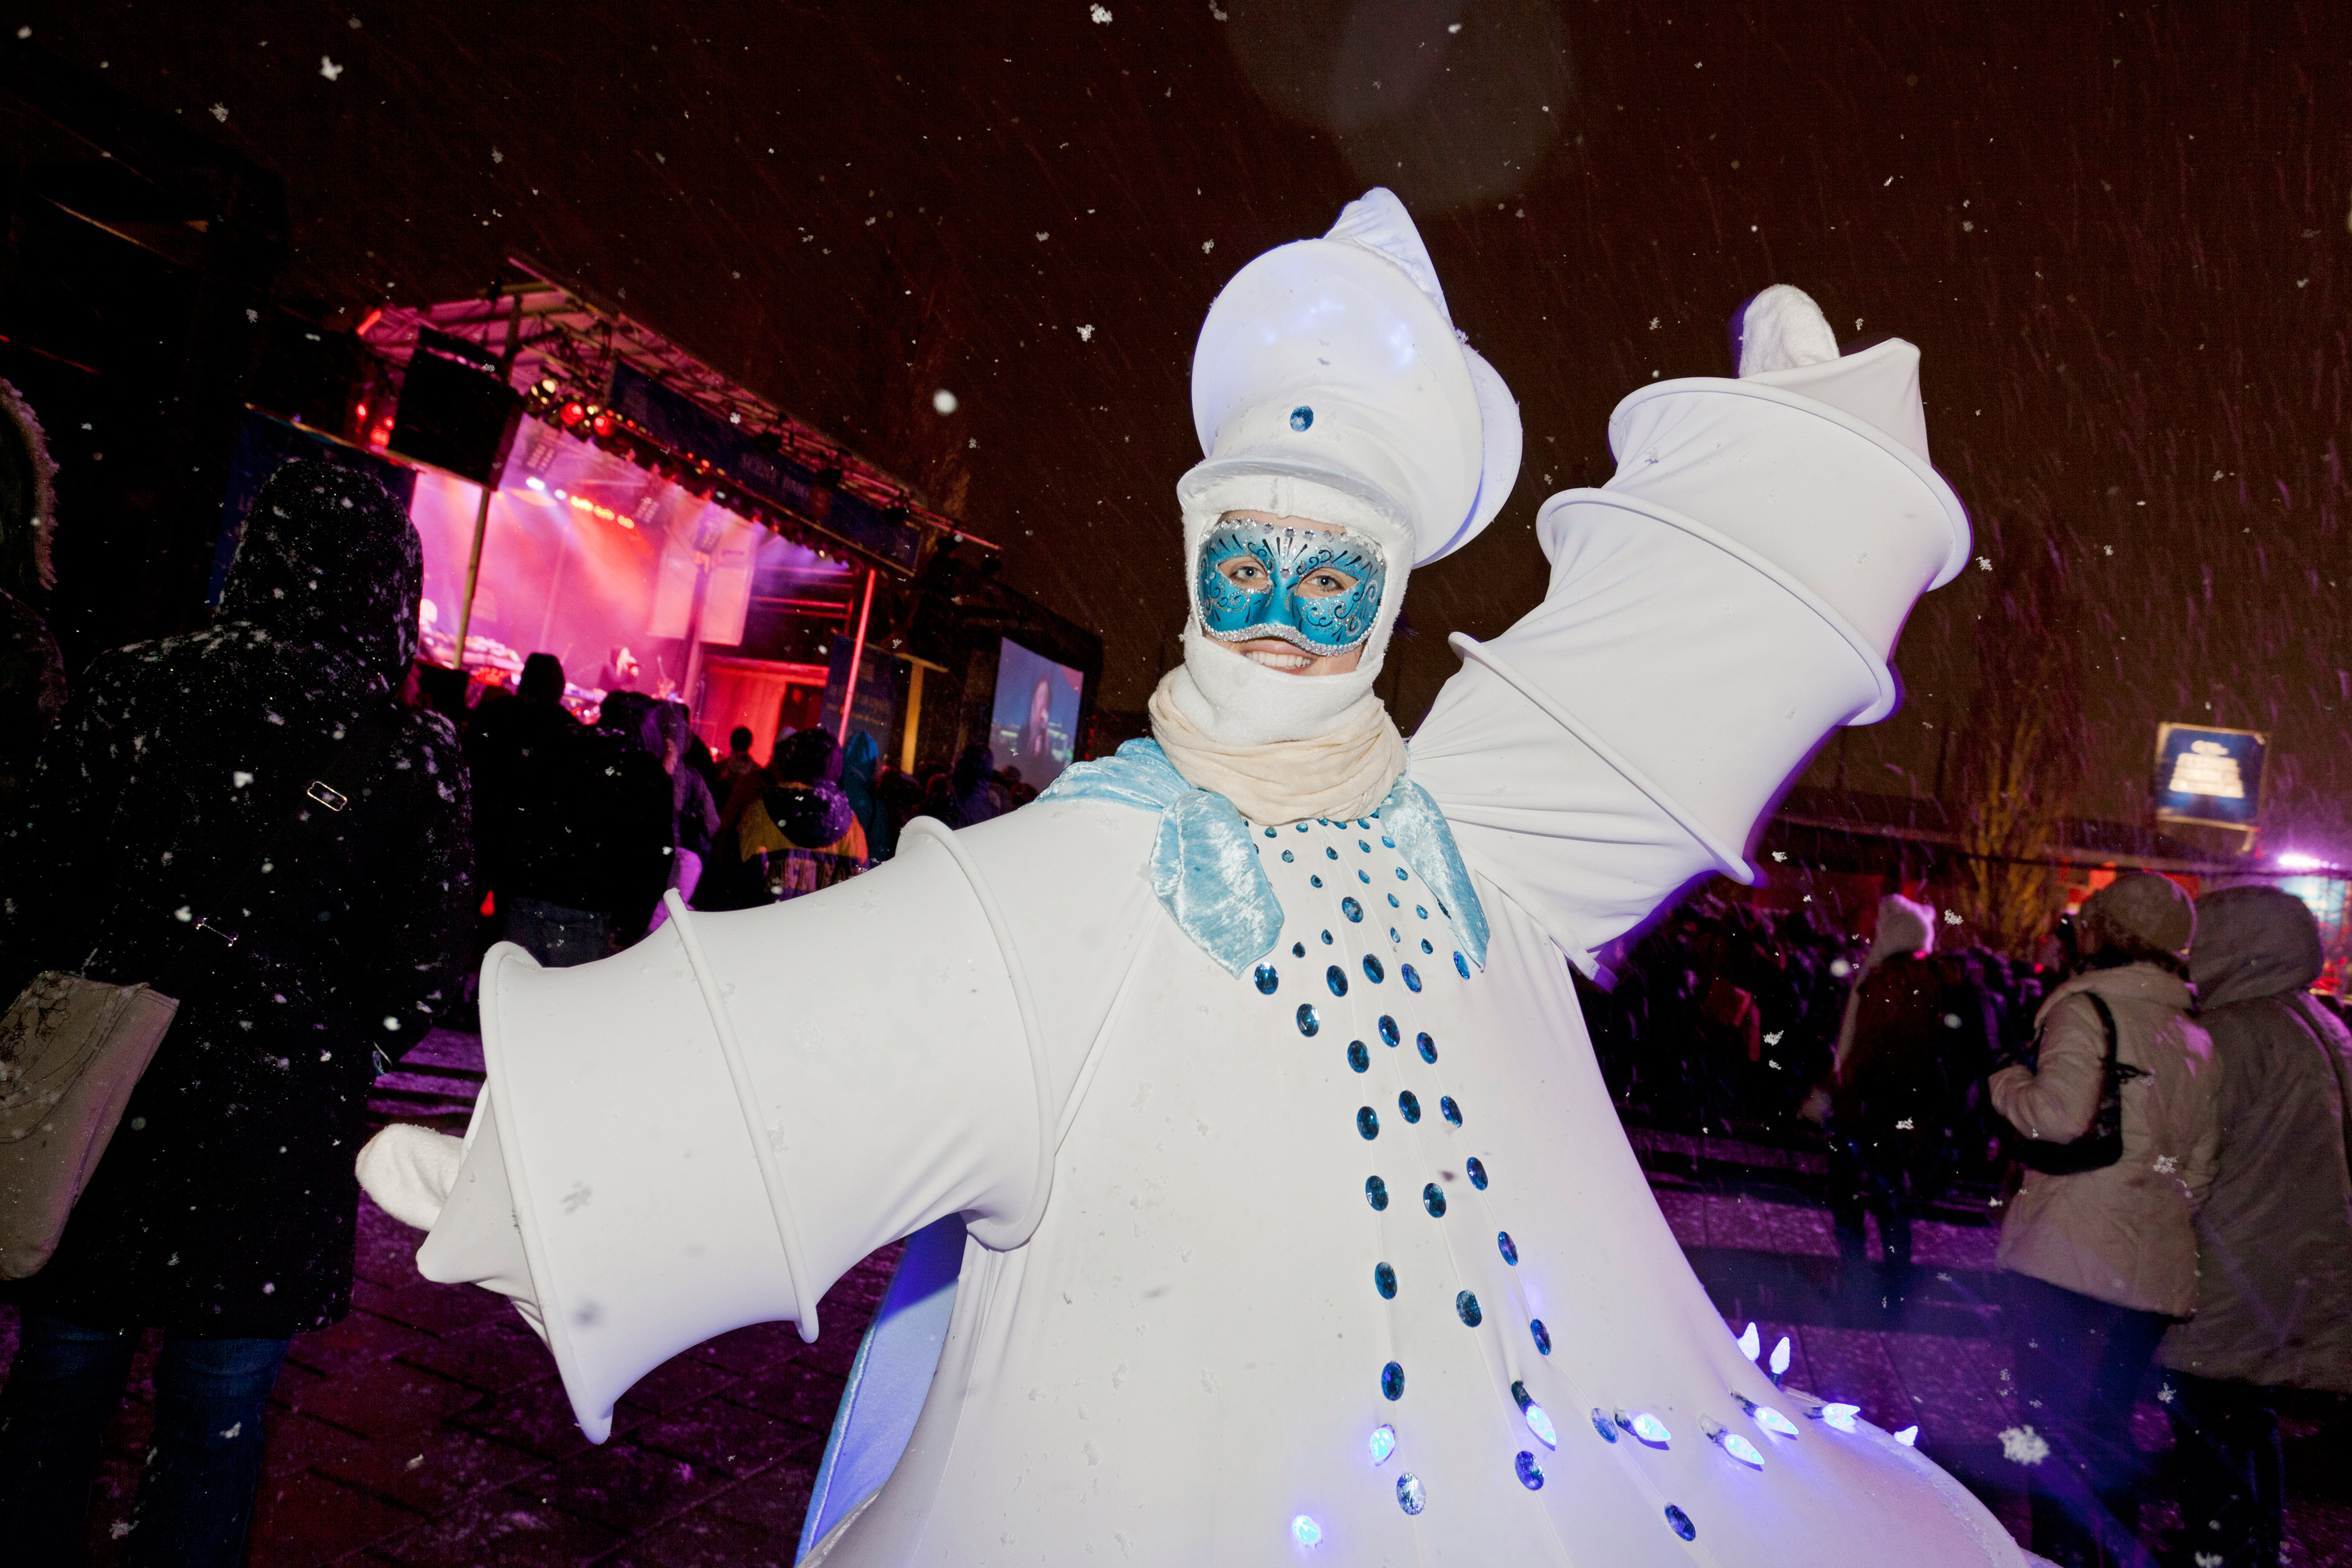 A woman in costume at Montréal en Lumière. Image by RENAULT Philippe / Getty